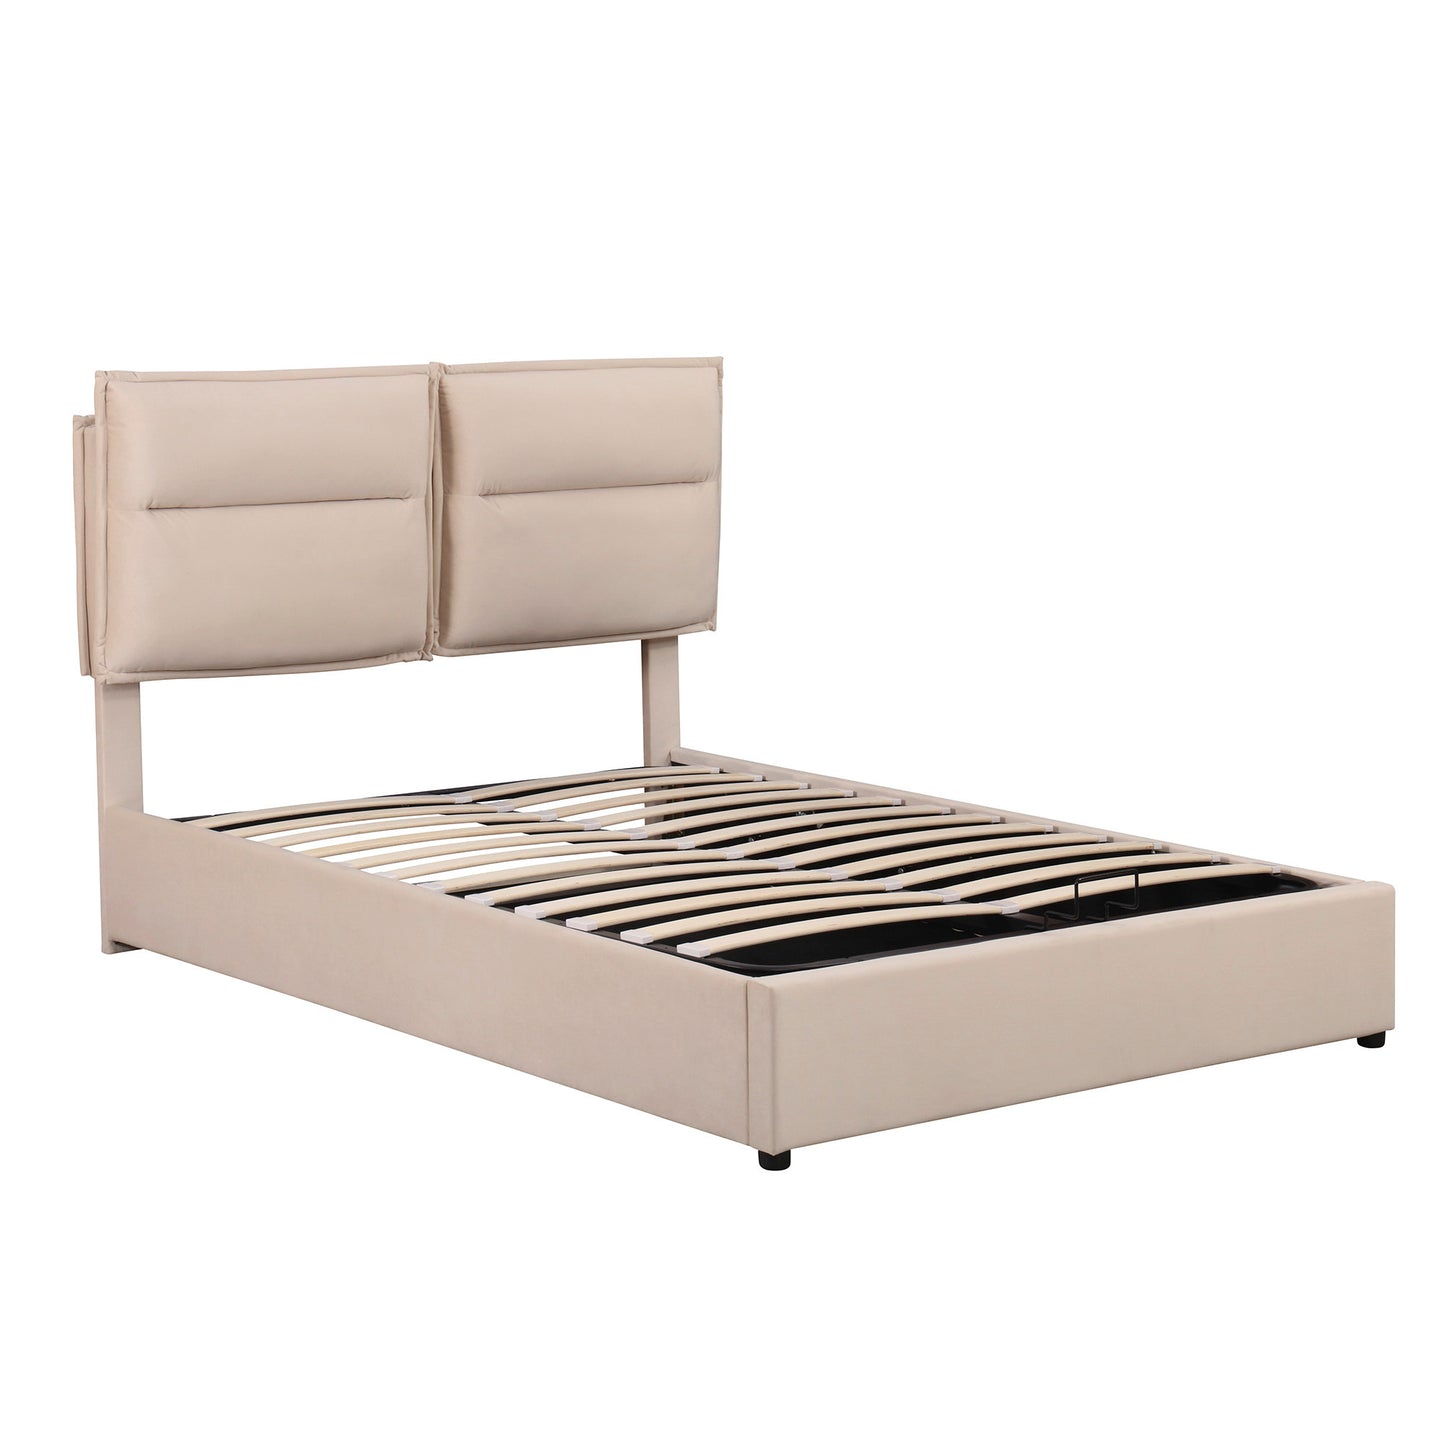 Upholstered Platform bed with a Hydraulic Storage System, Full size, Beige